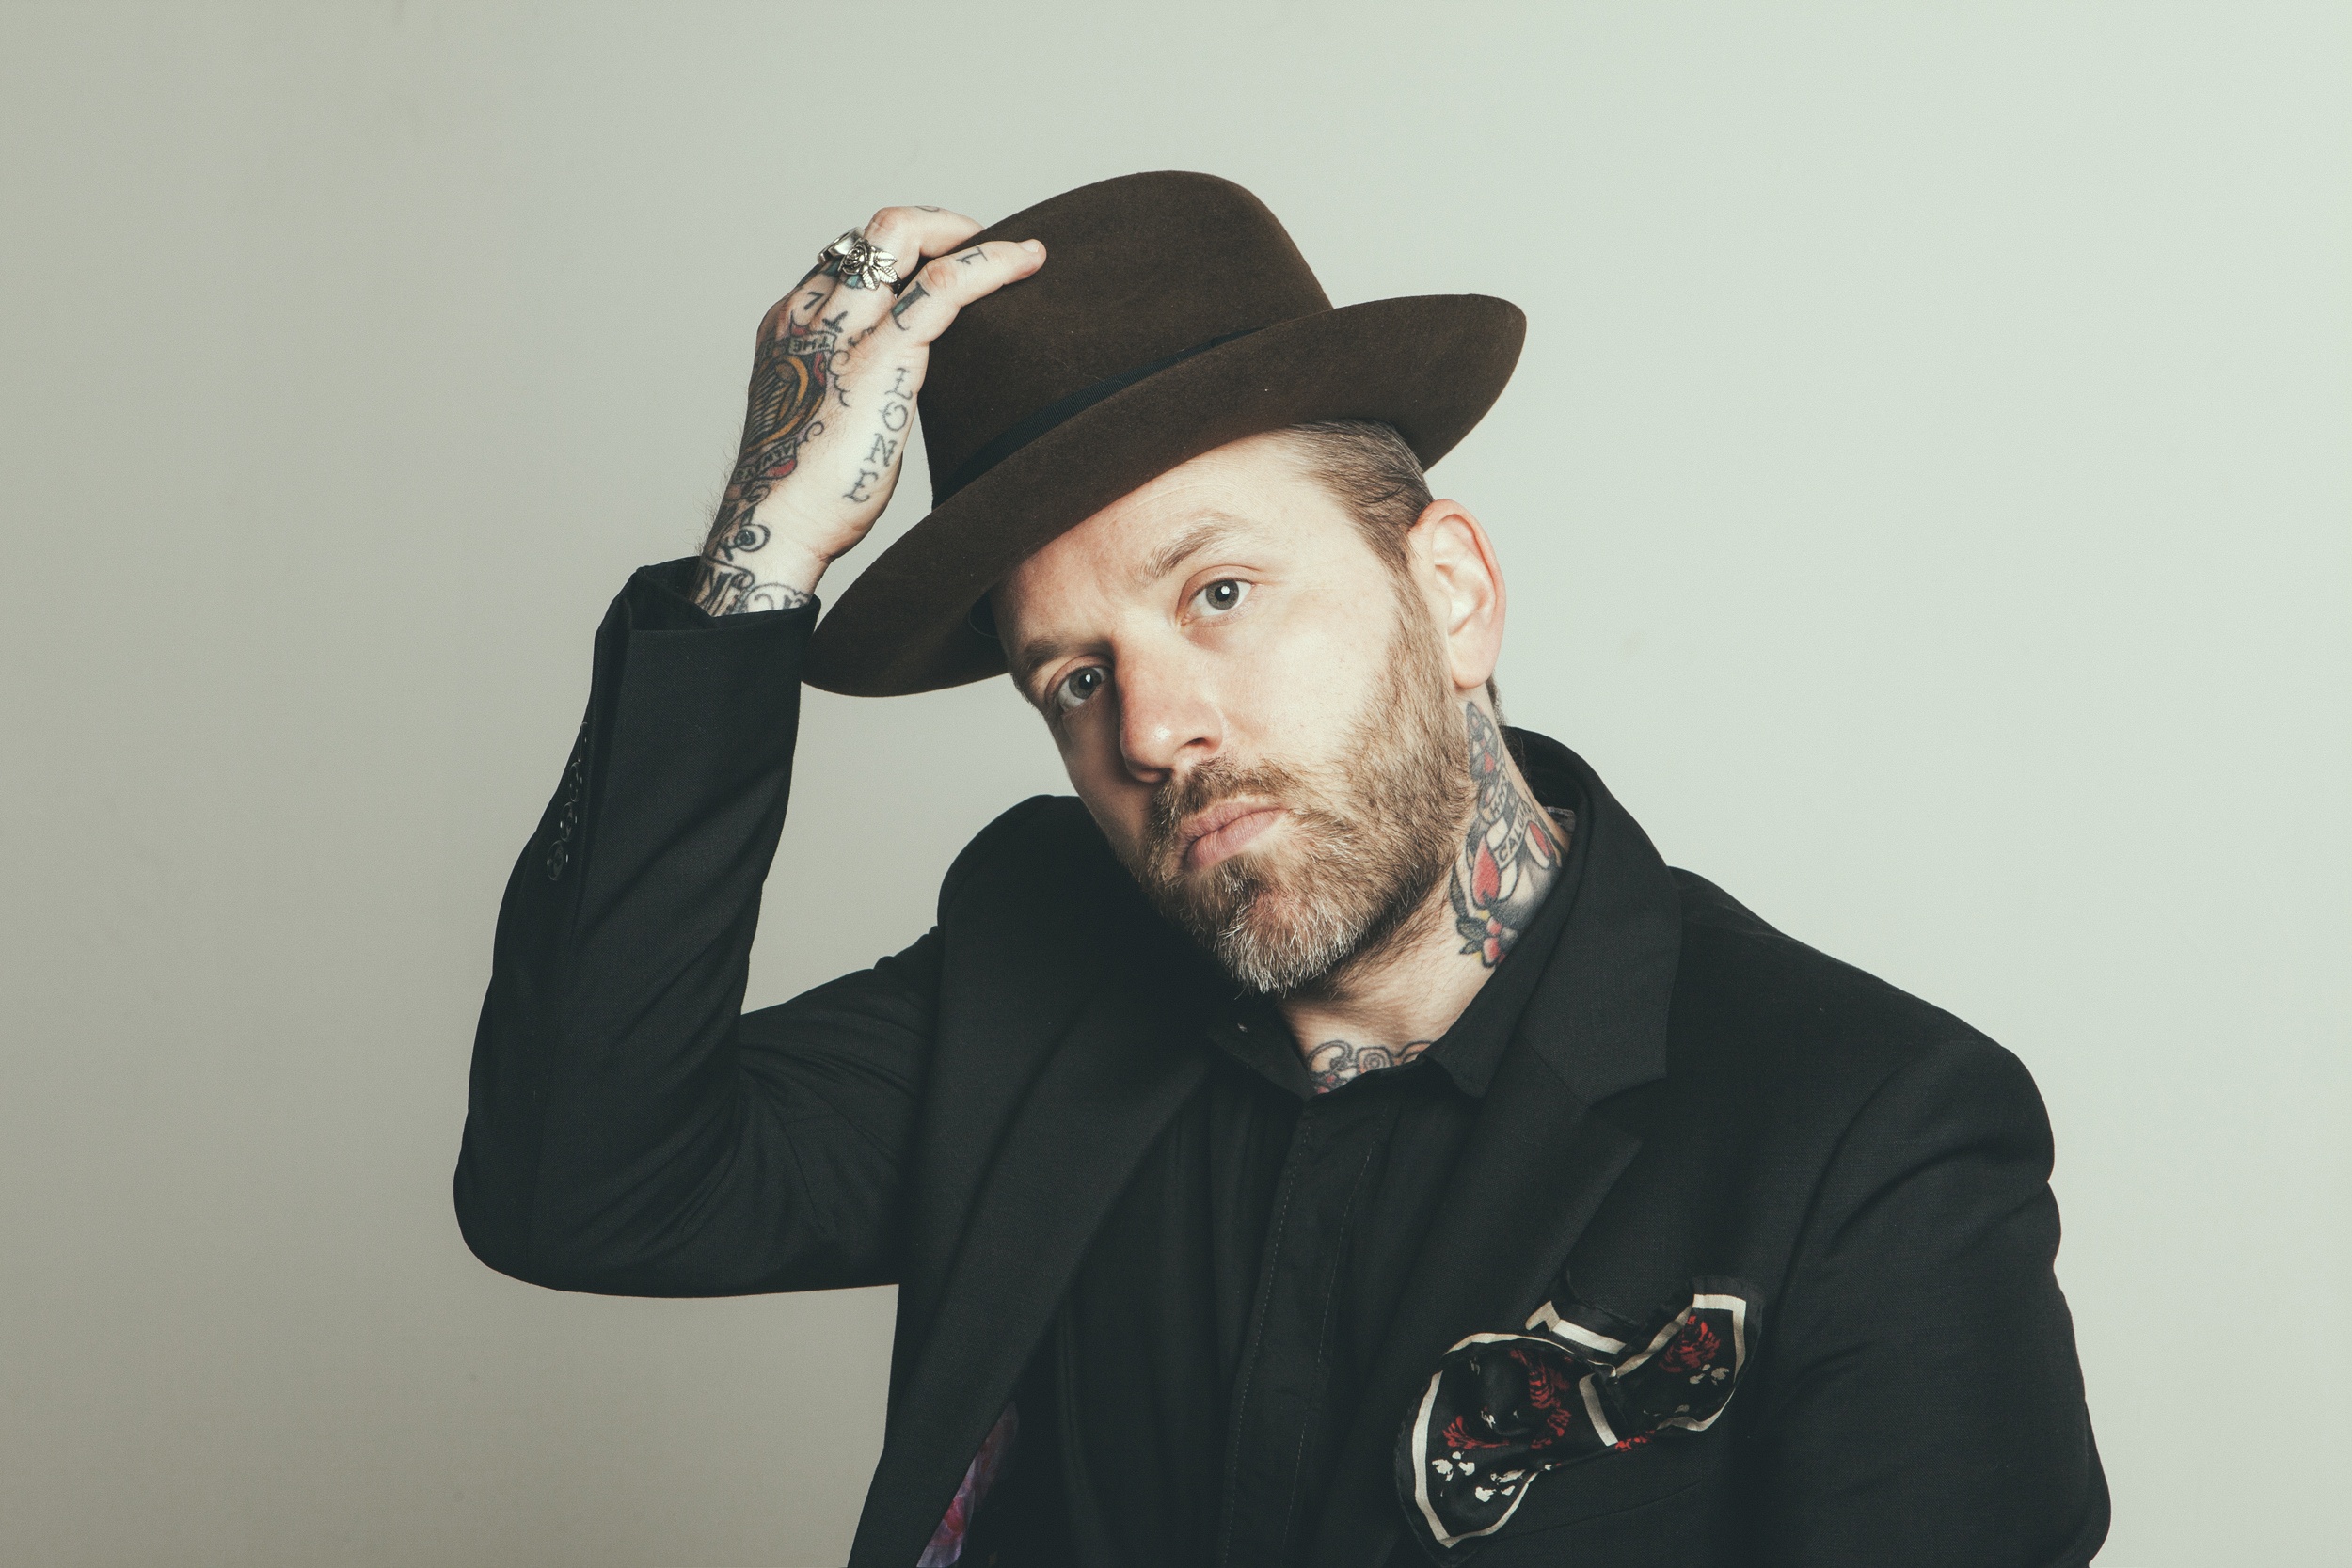 ORIGINALITY - City and Colour is set to hit a Red Deer stage on June 6th as part of their current tour.